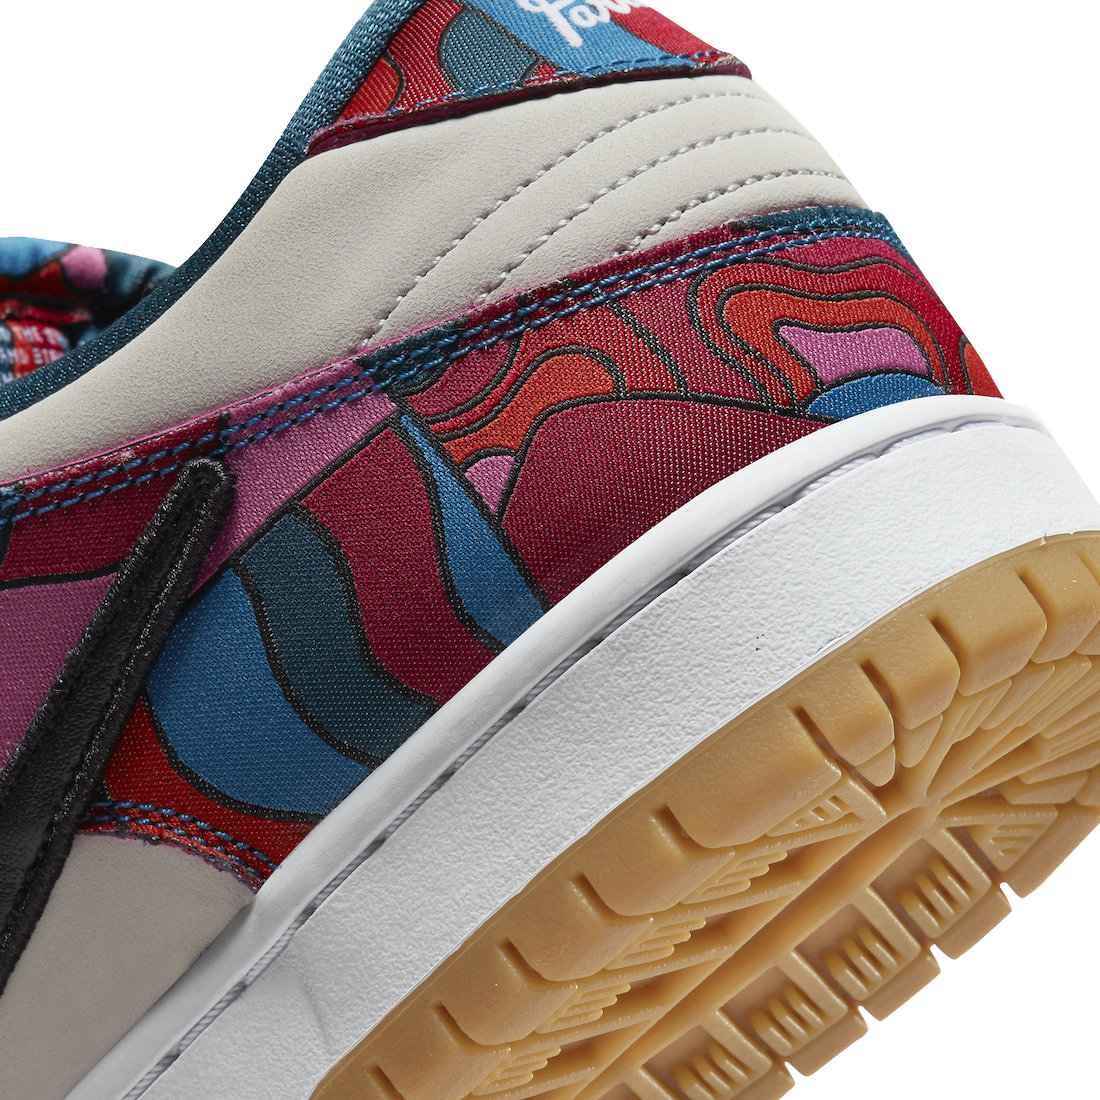 Parra x Nike SB Dunk Low Abstract Art DH7695-600